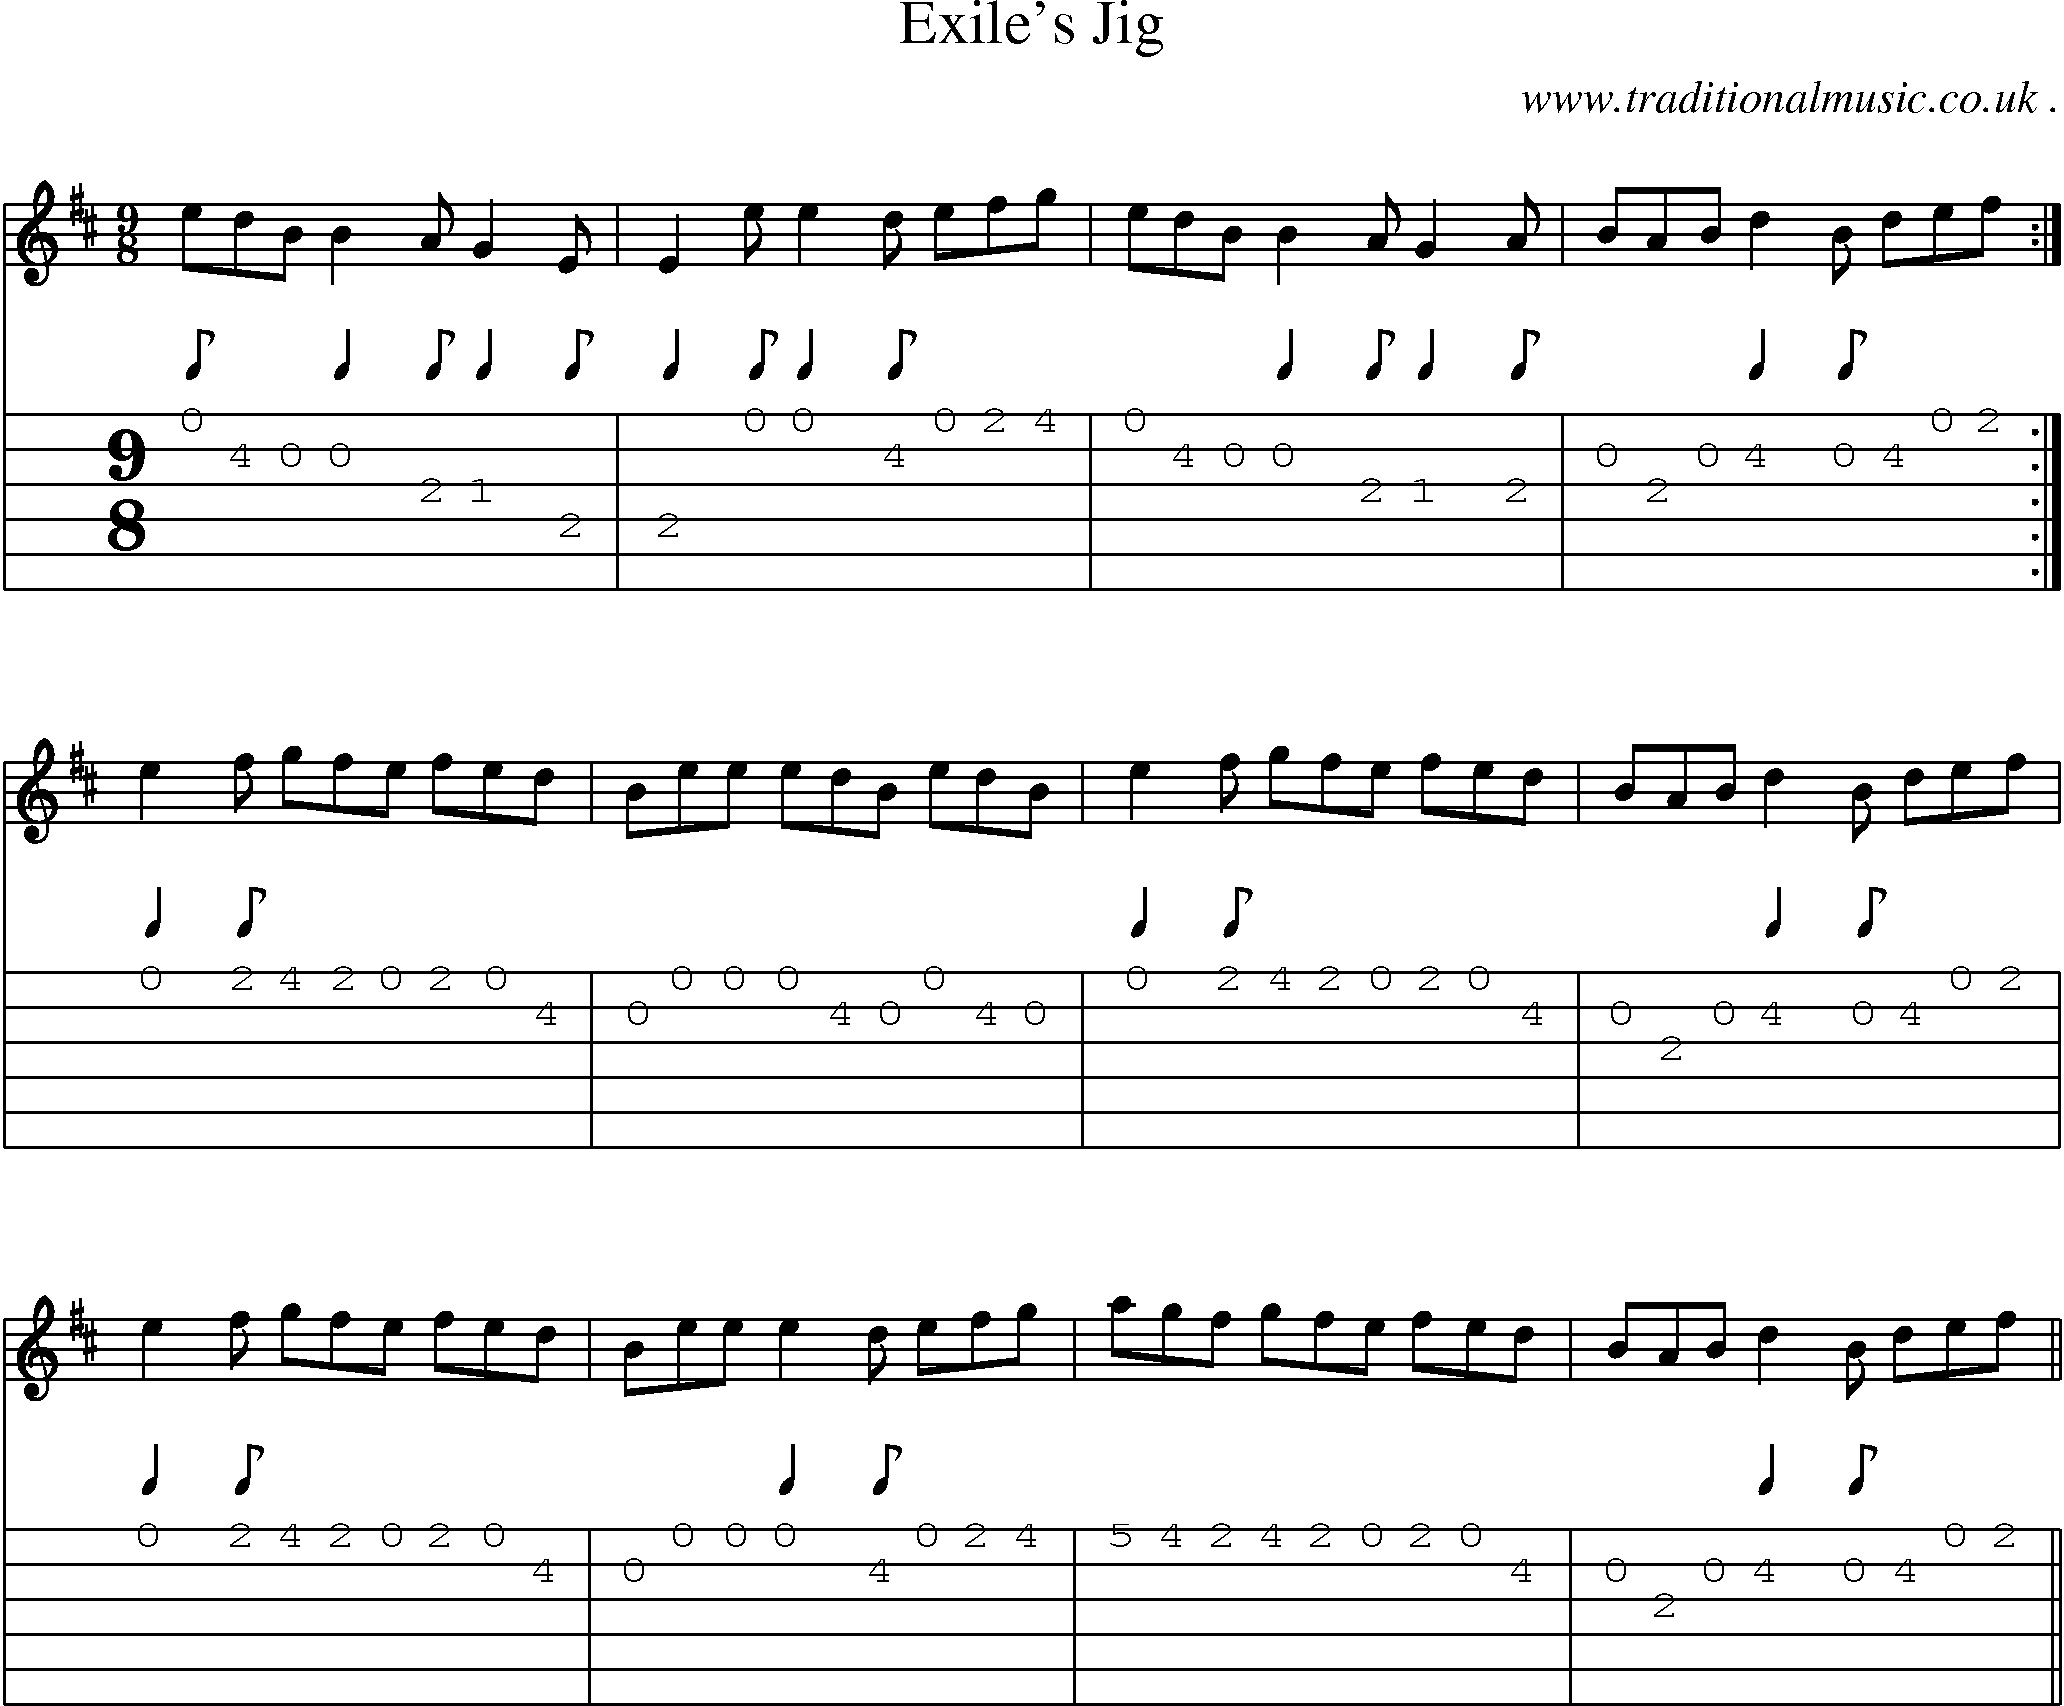 Sheet-Music and Guitar Tabs for Exiles Jig